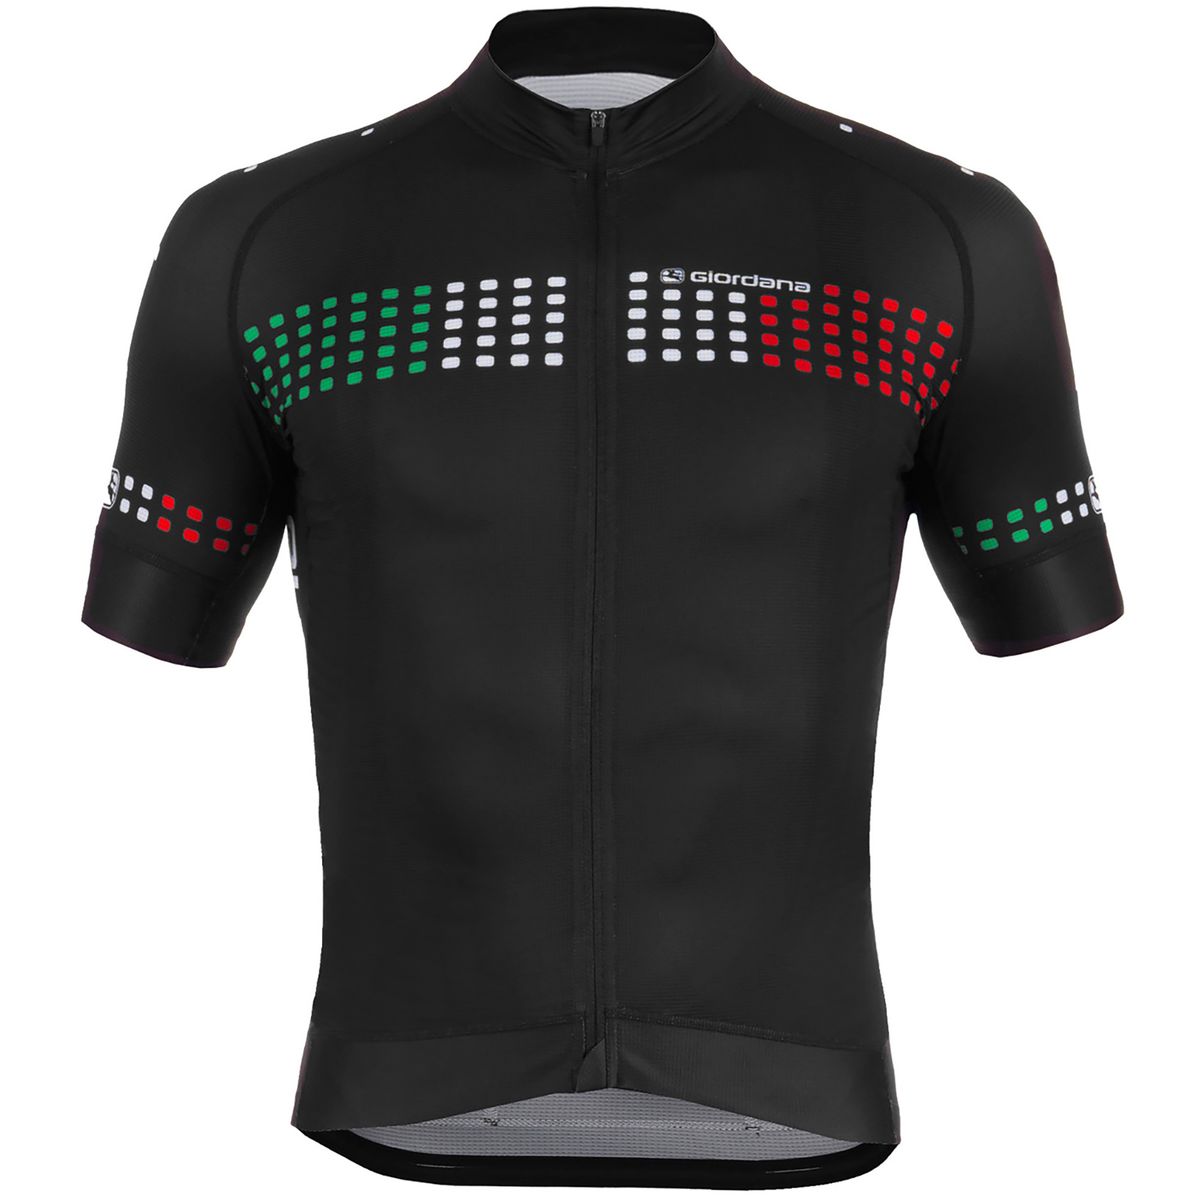 Giordana Trade FormaRed Carbon Jersey Men's